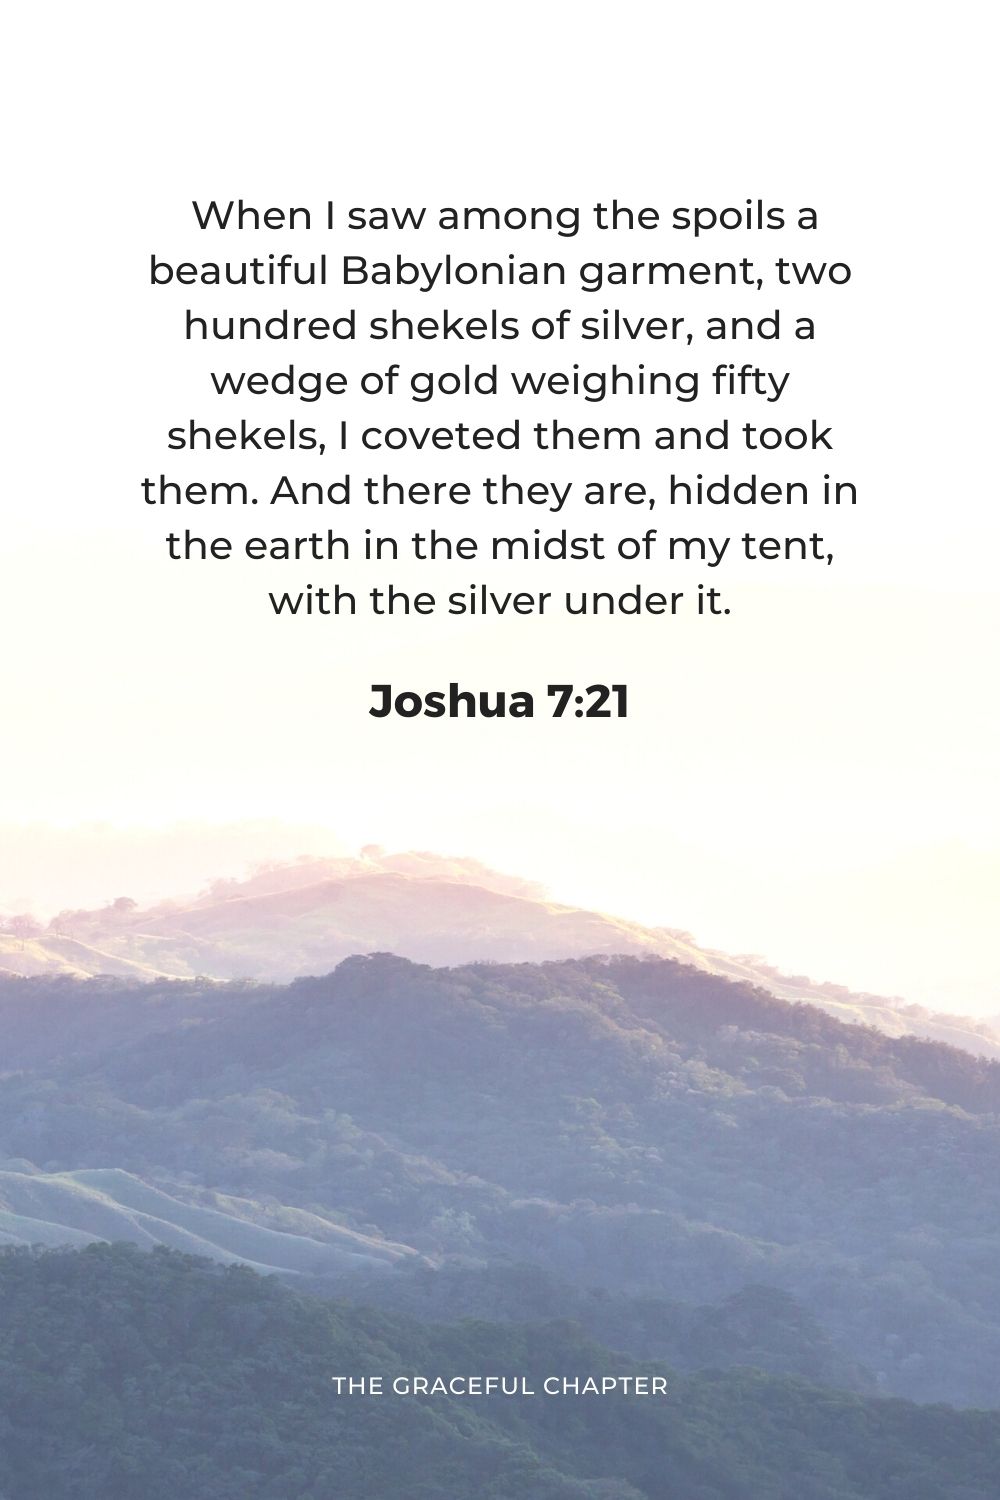  When I saw among the spoils a beautiful Babylonian garment, two hundred shekels of silver, and a wedge of gold weighing fifty shekels, I coveted them and took them. And there they are, hidden in the earth in the midst of my tent, with the silver under it.”